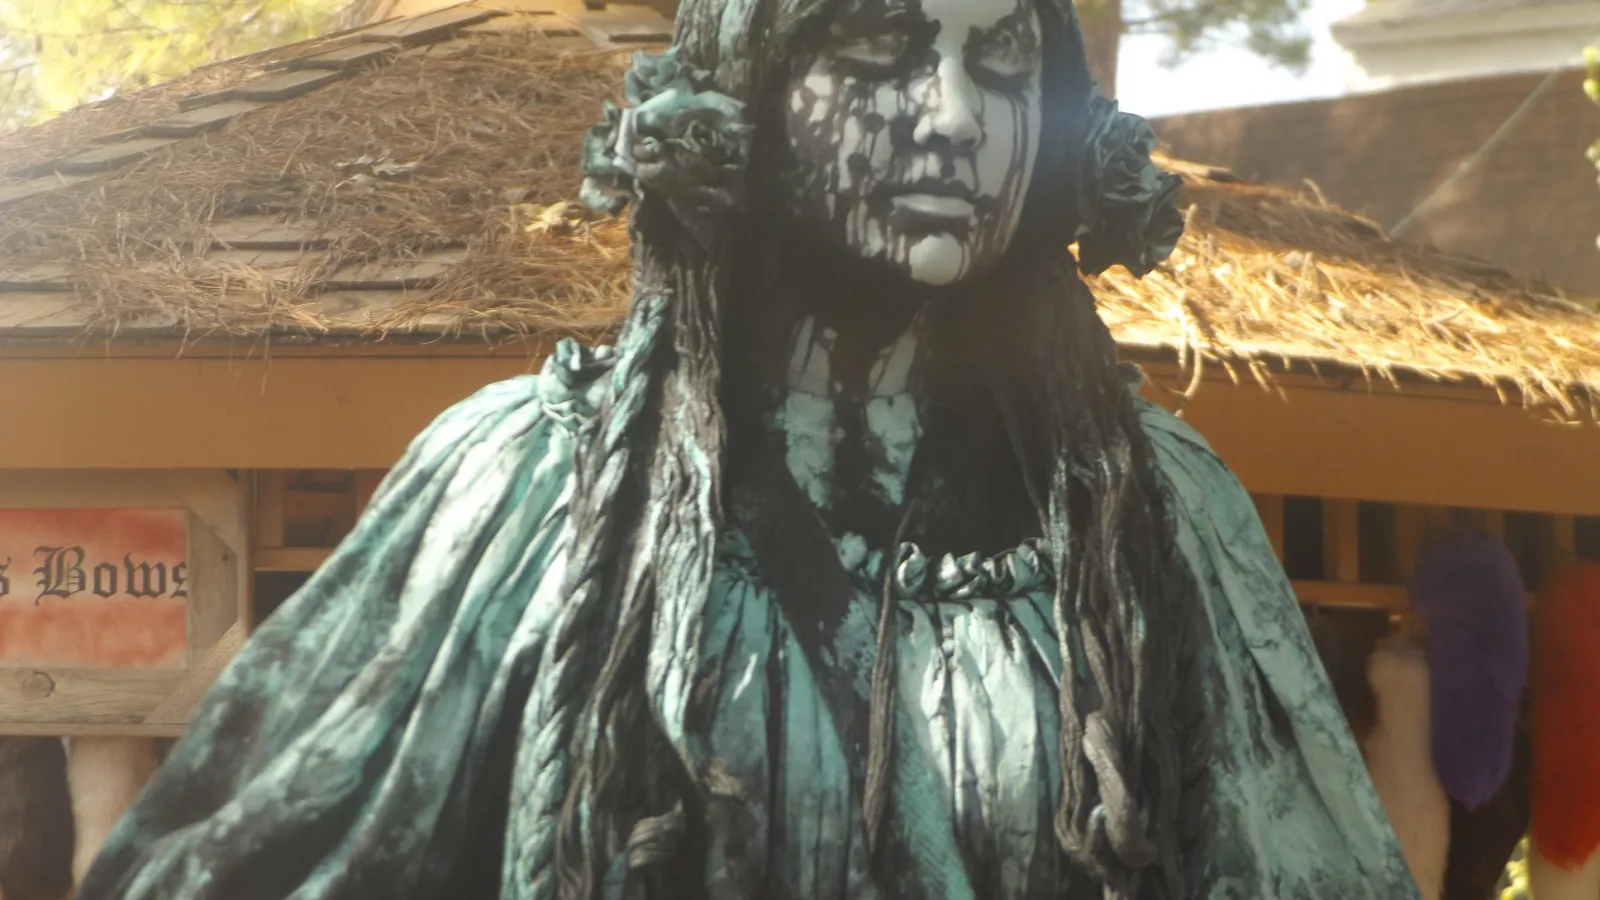 Weeping Angel spotted at Texas Renaissance Festival, school days. Where is The Doctor? - Peldar Stogsdill